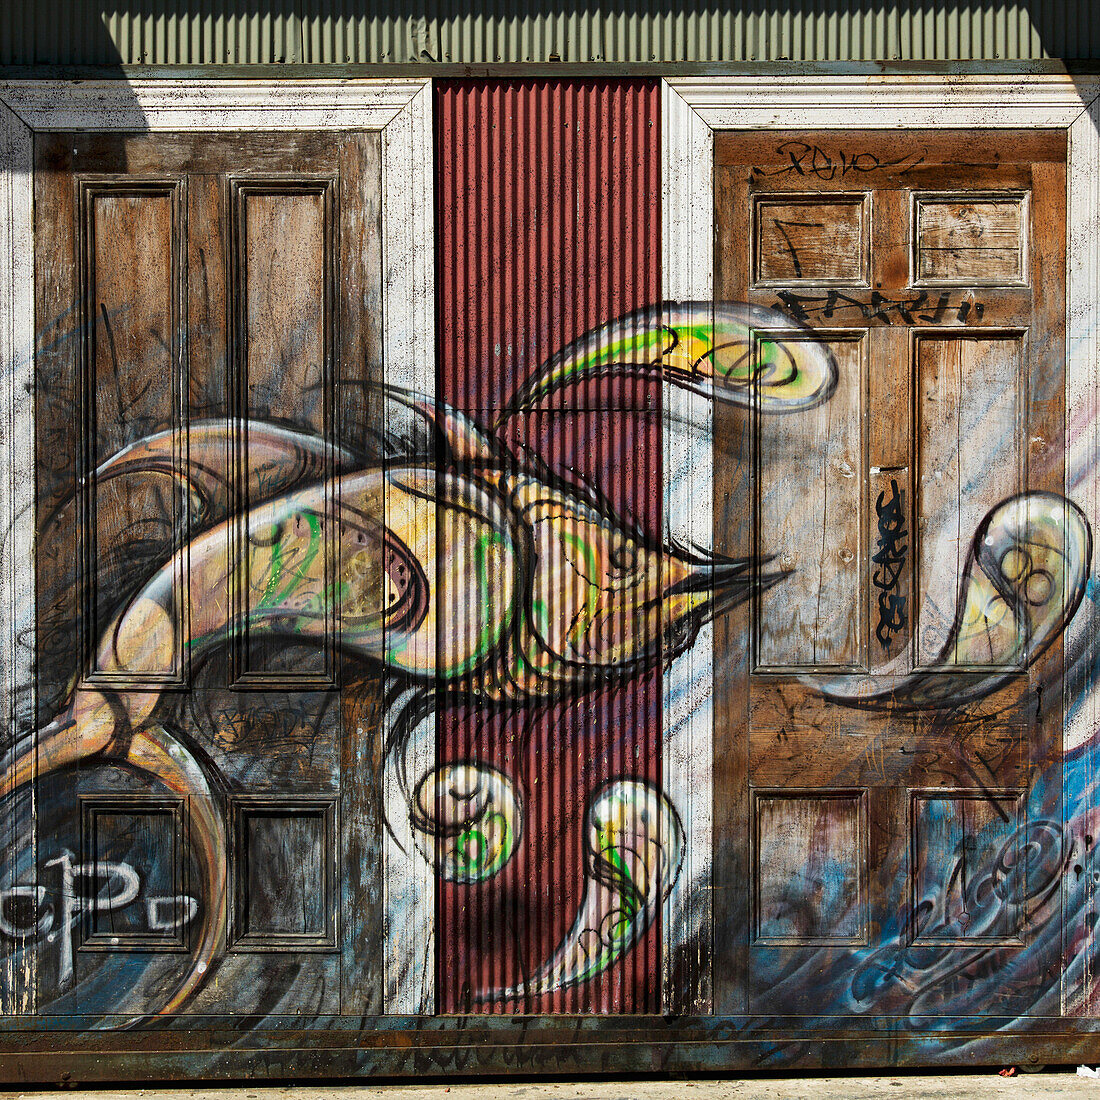 Colourful painted fish and water droplets across residential doorways, Valparaiso, Chile